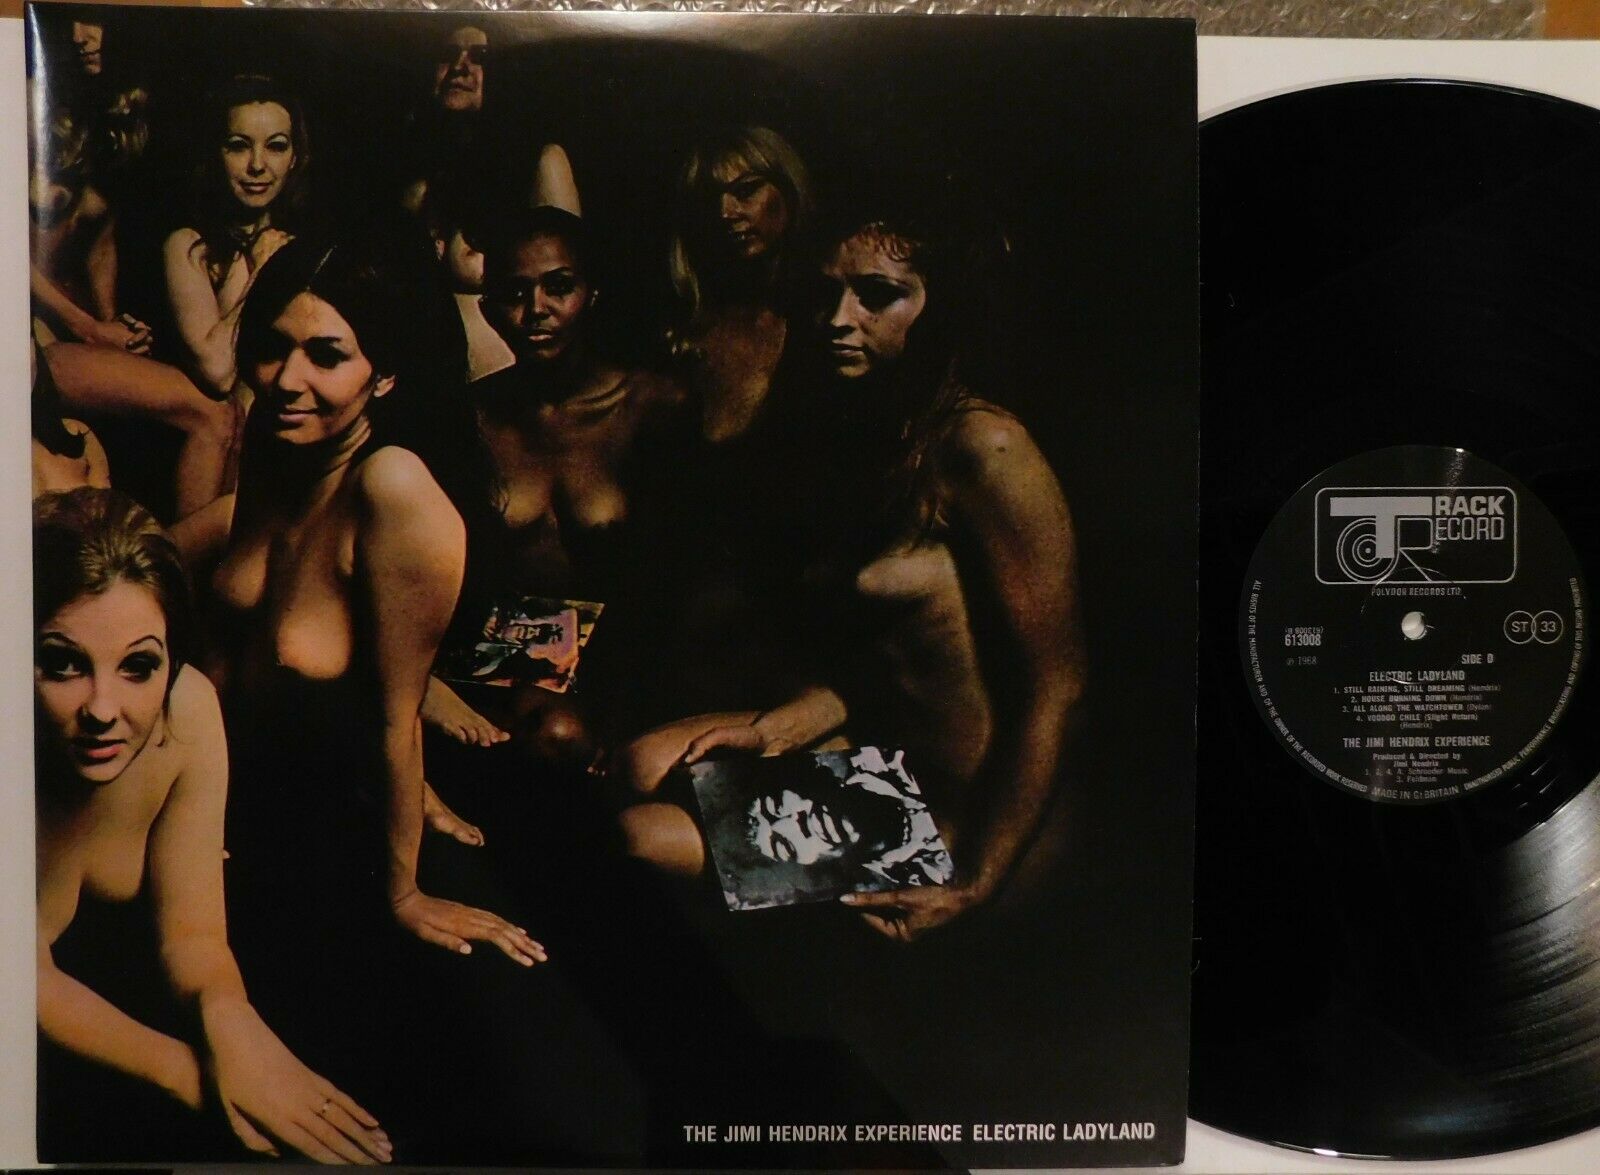 popsike.com - JIMI HENDRIX ELECTRIC LADYLAND NUDE COVER UK REISSUE